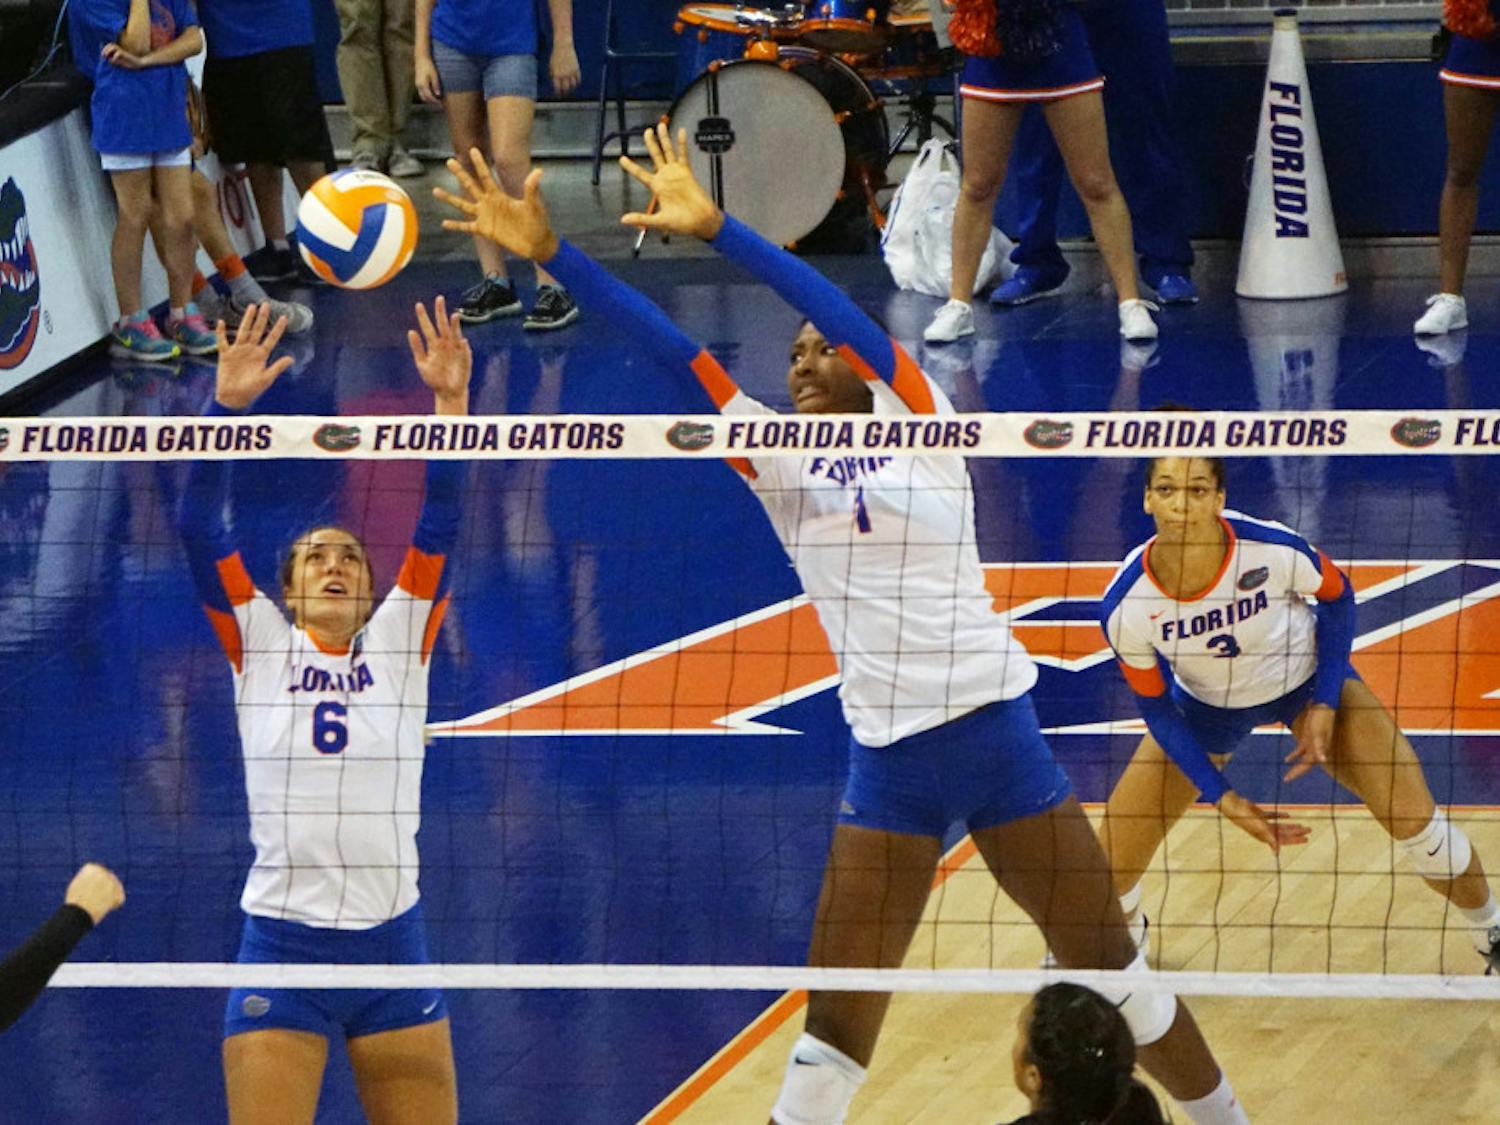 UF setter Mackenzie Dagostino (6) and middle blocker Rhamat Alhassan (1) jump for a block during Florida's 3-1 win on Sept. 20, 2015, in the O'Connell Center.